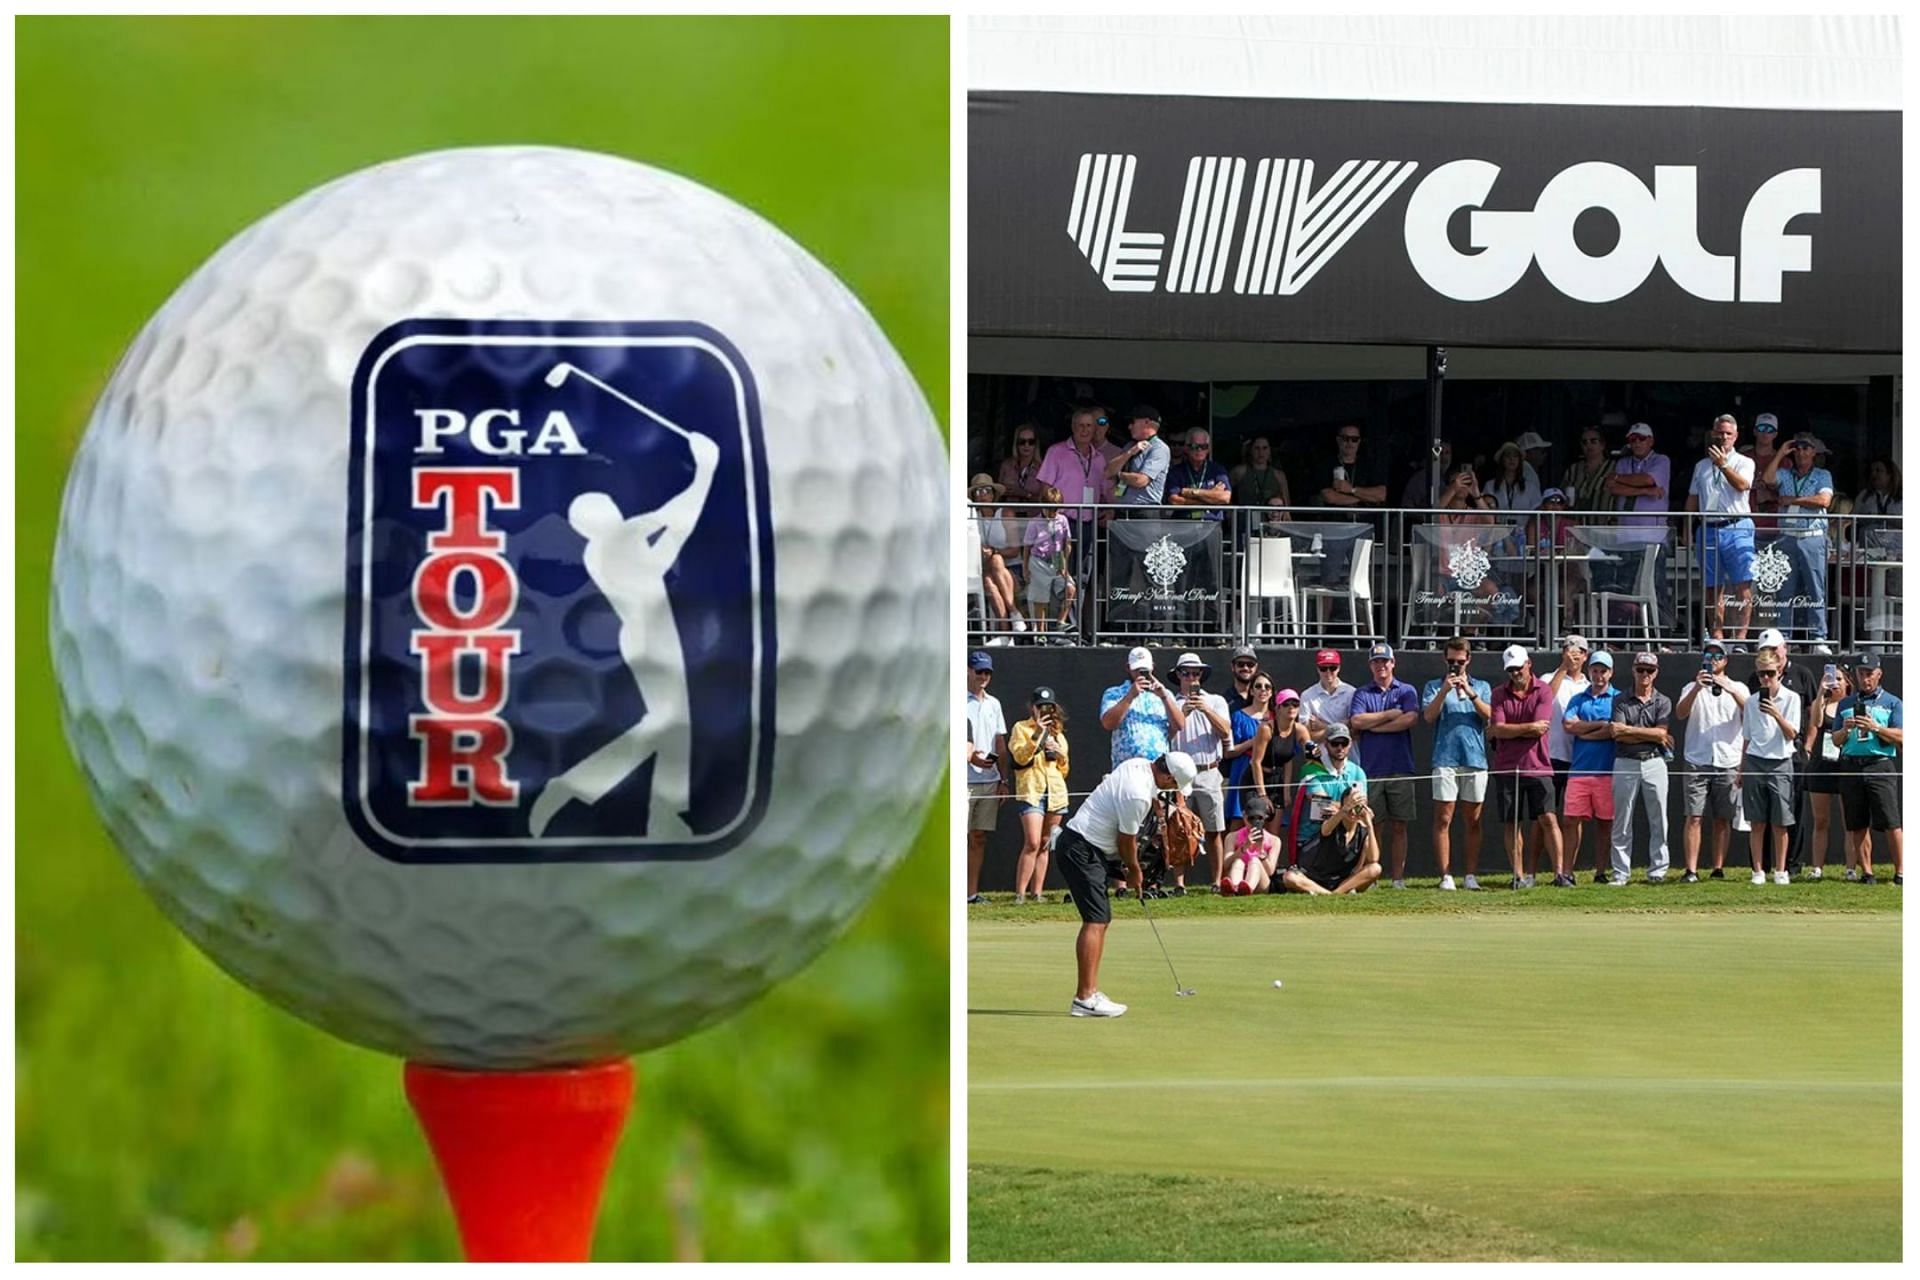 LIV Golf was quick to react on the news of PGA Tour bringing no-cut events from the 2024